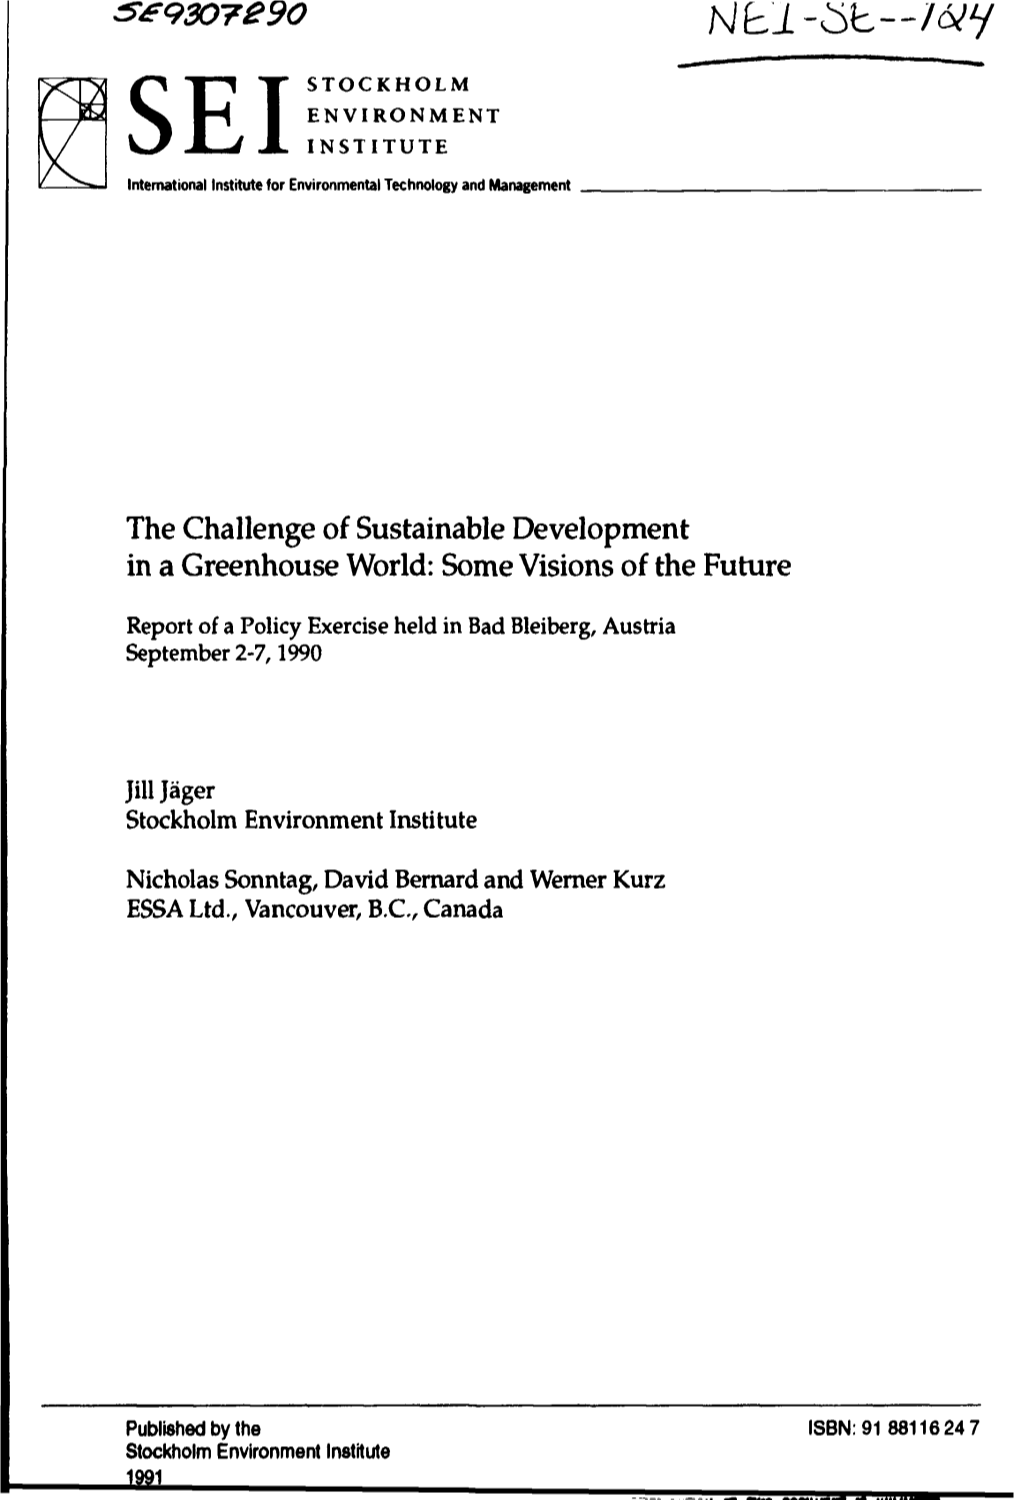 The Challenge of Sustainable Development in a Greenhouse World: Some Visions of the Future